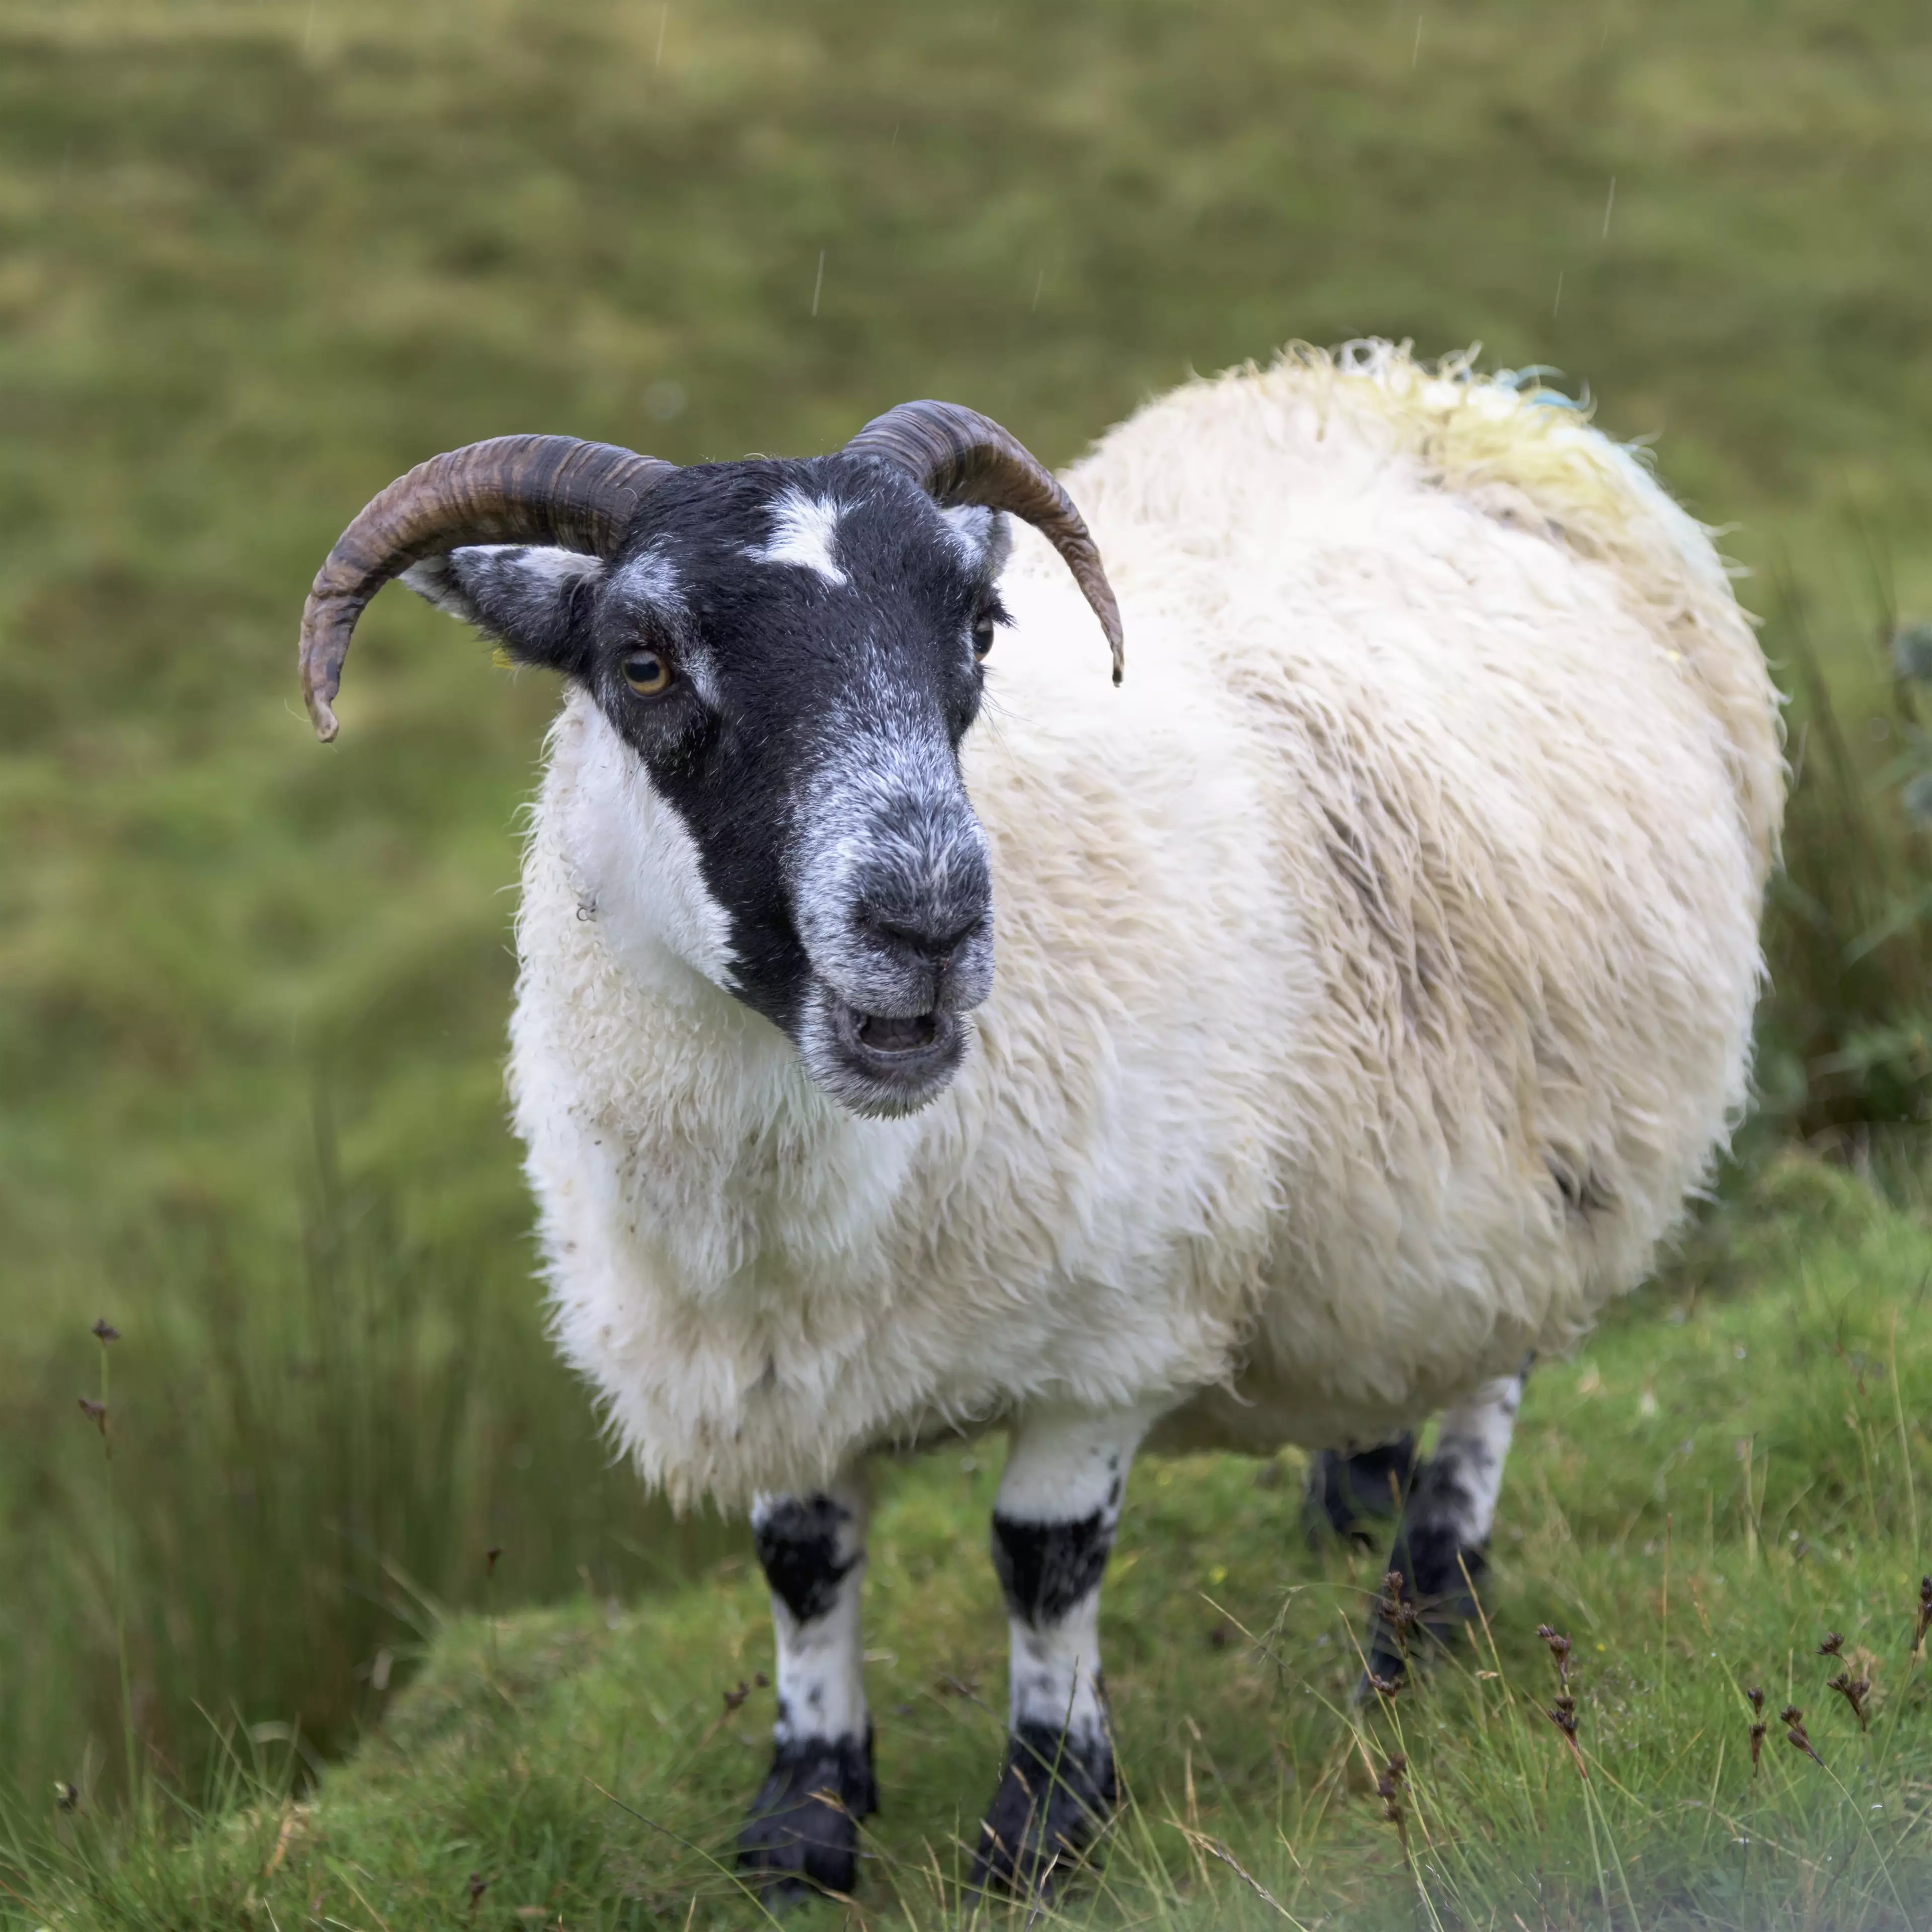 Scientists detected the virus in sheep in the Scottish Highlands.